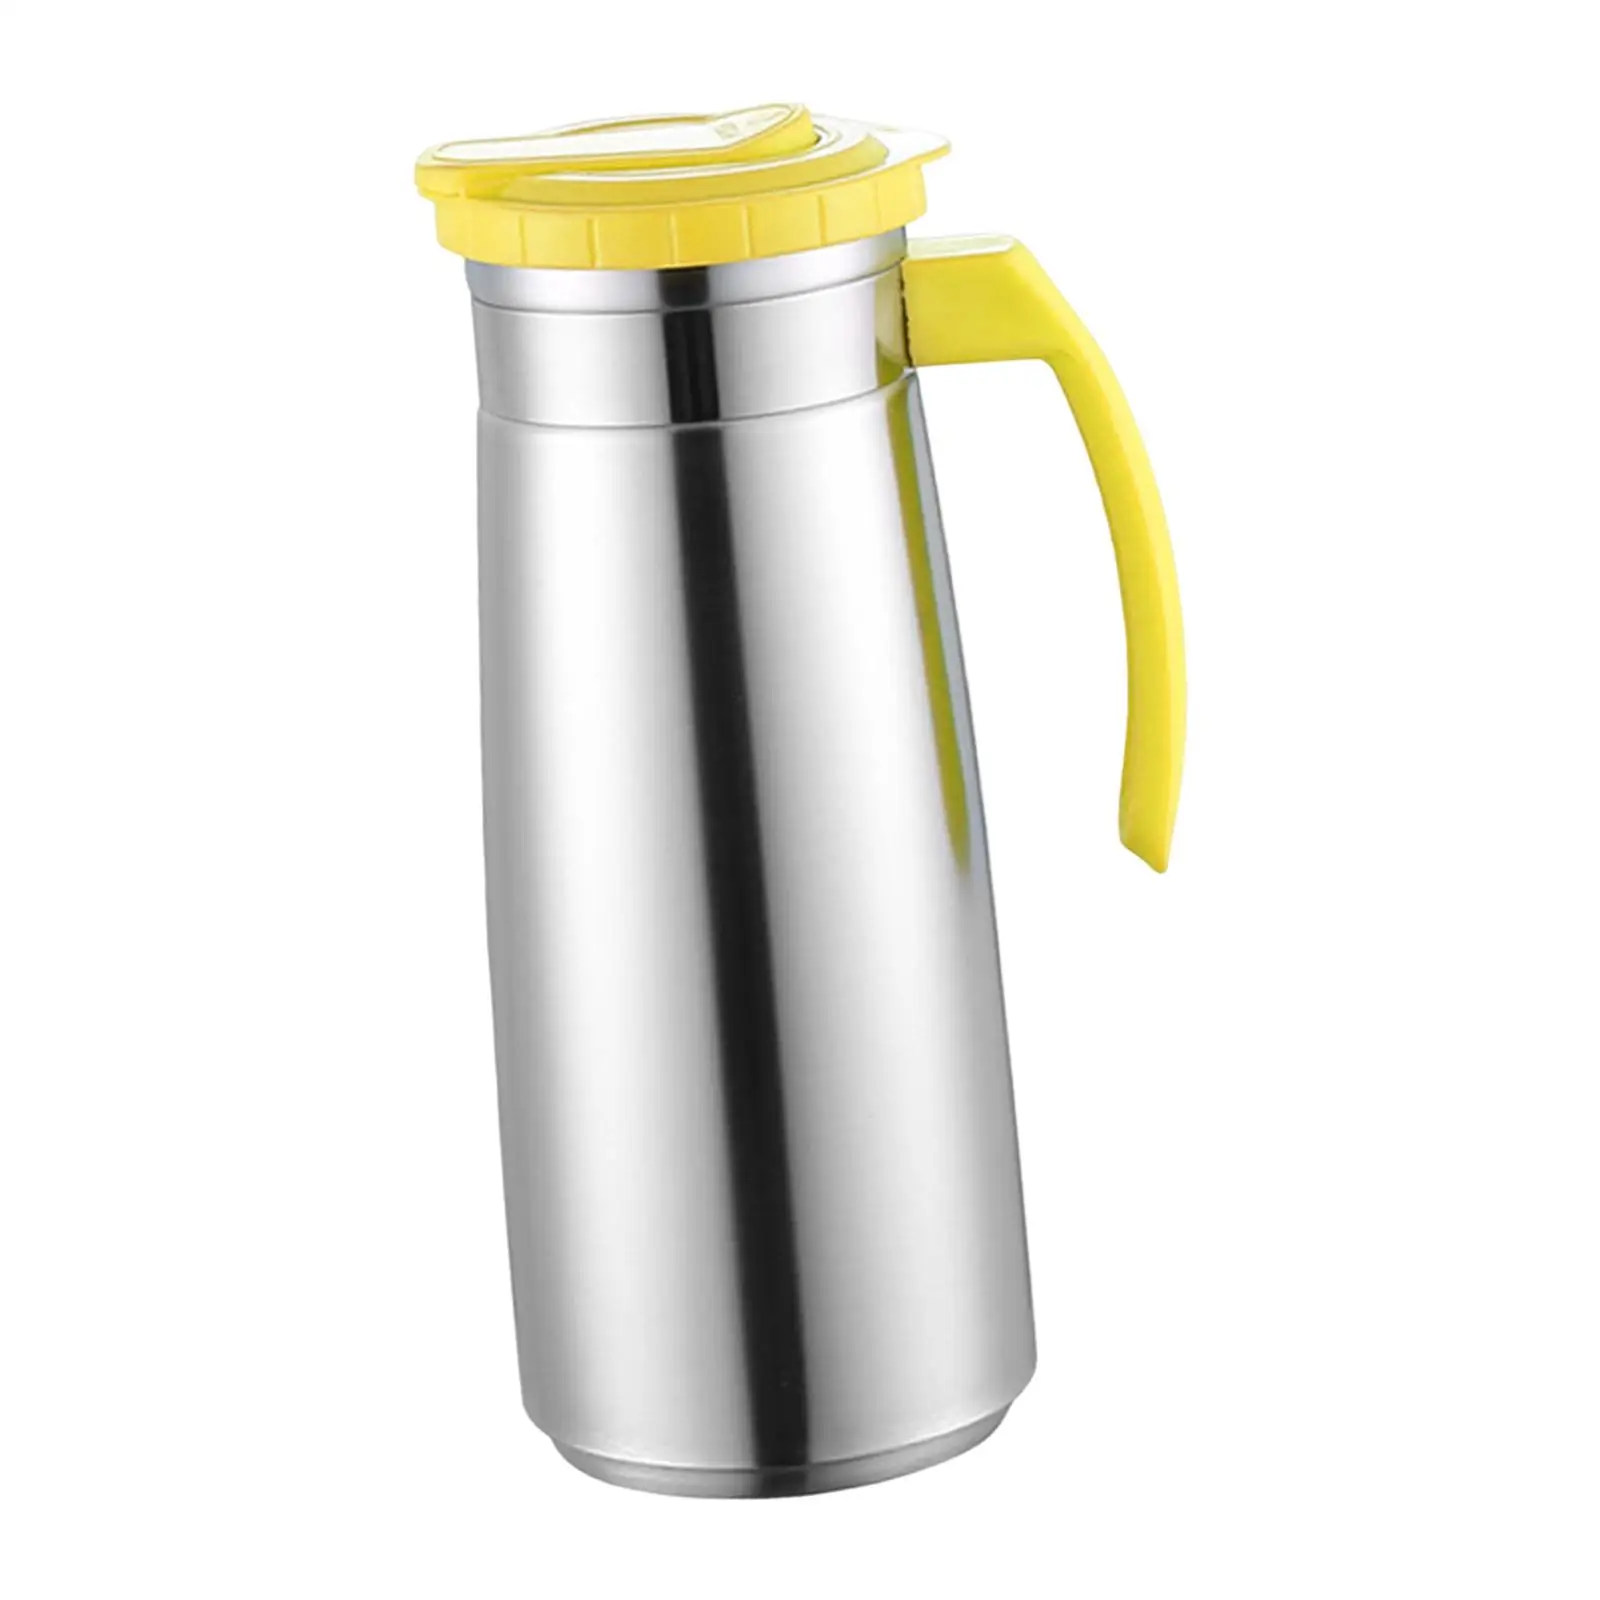 Water Bottle Drinkware Tea Kettle Water Pitcher for Home Refrigerator